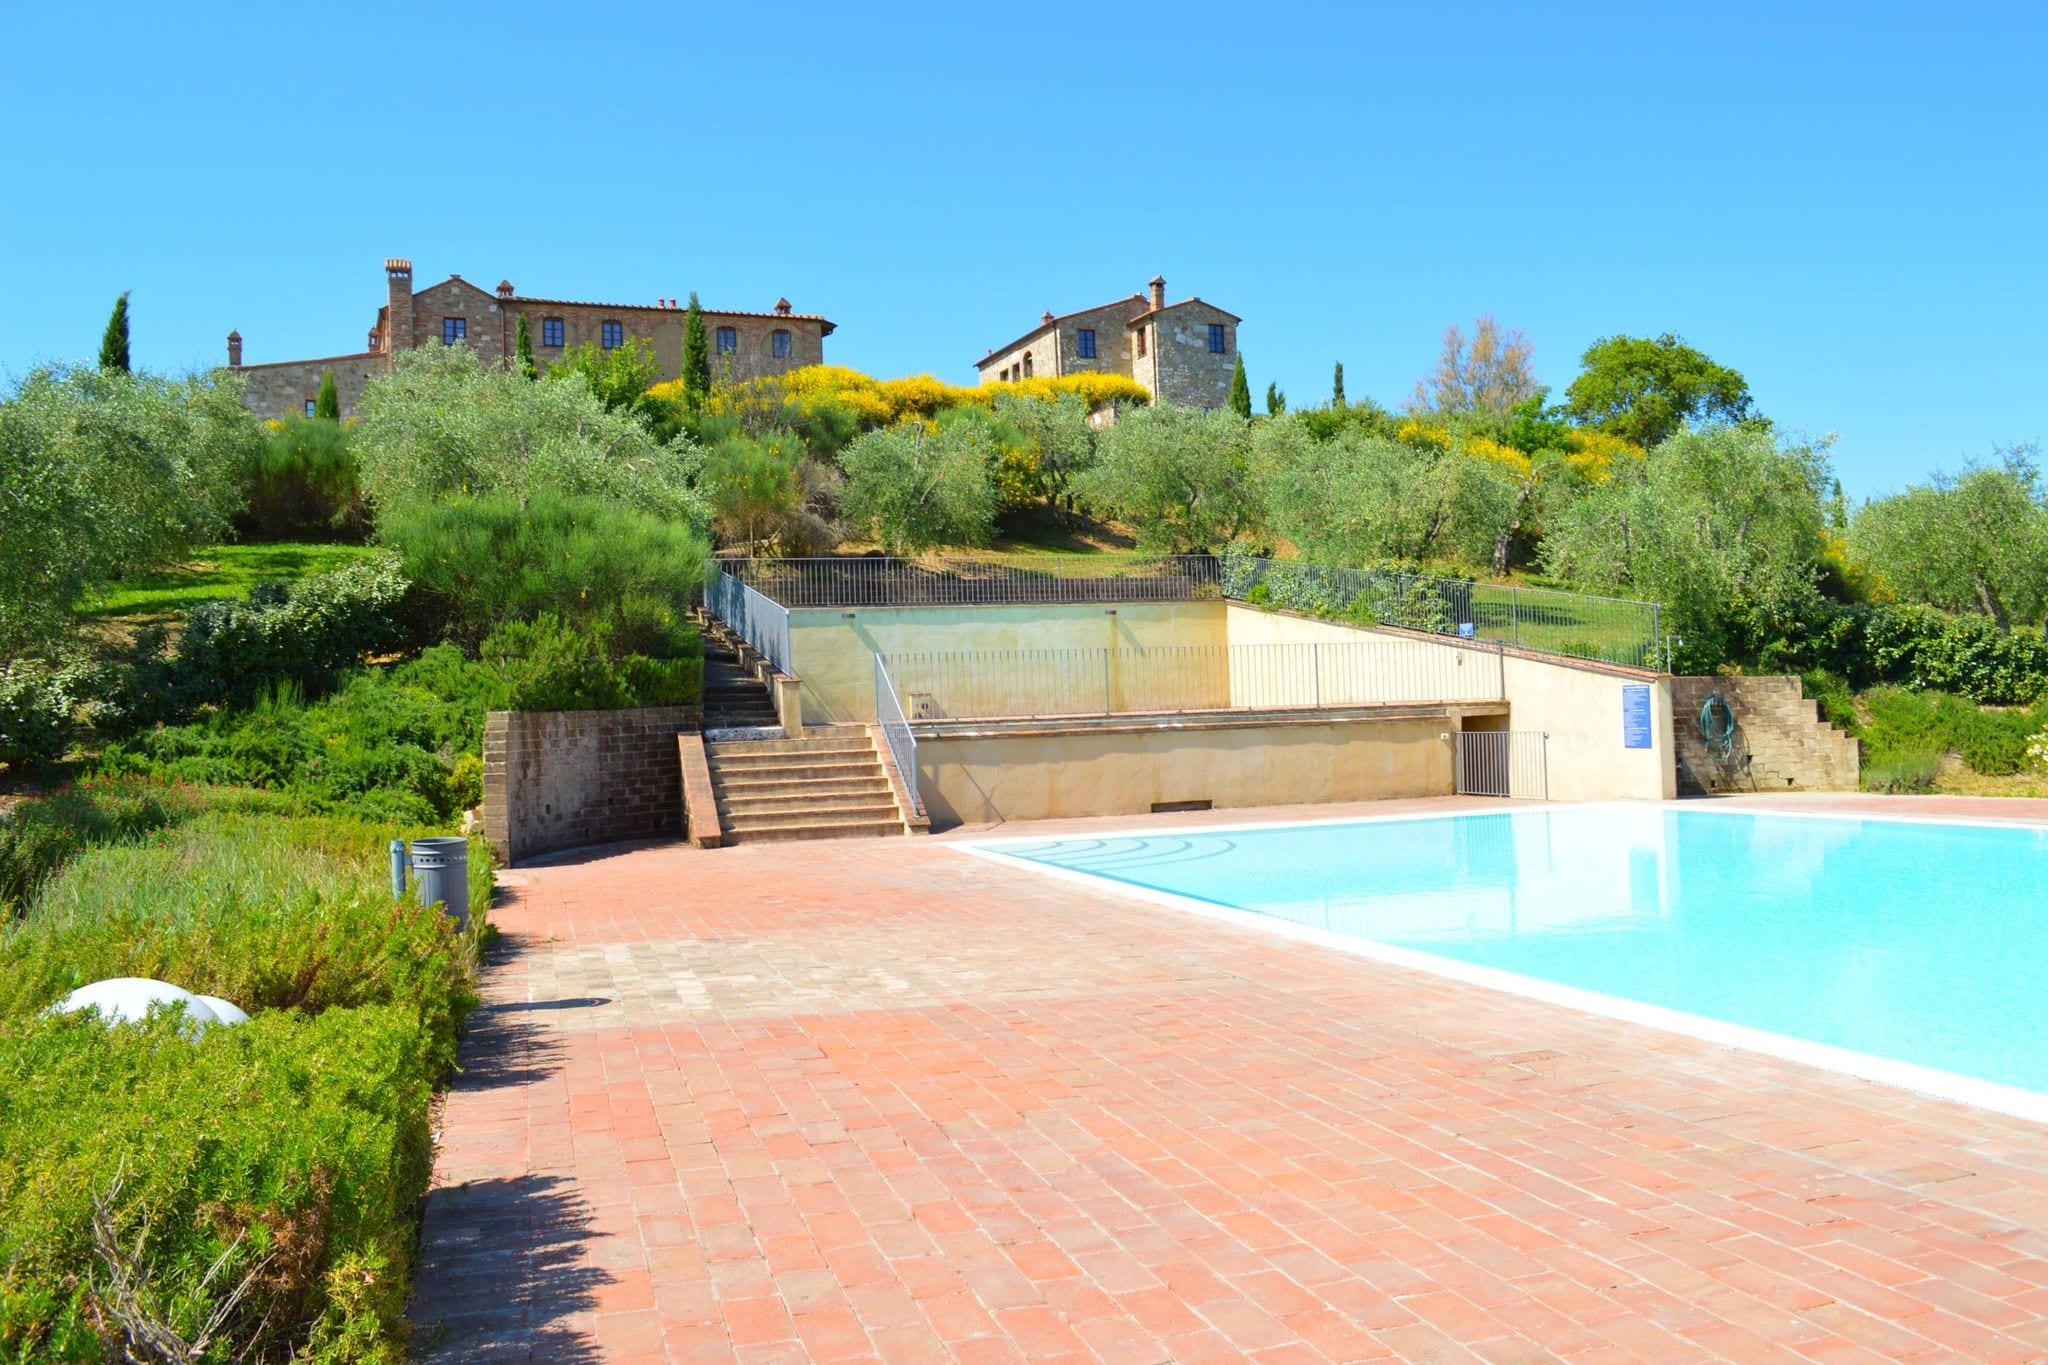 Apartment with 2 pools in the village of Asciano, in the hills of Siena